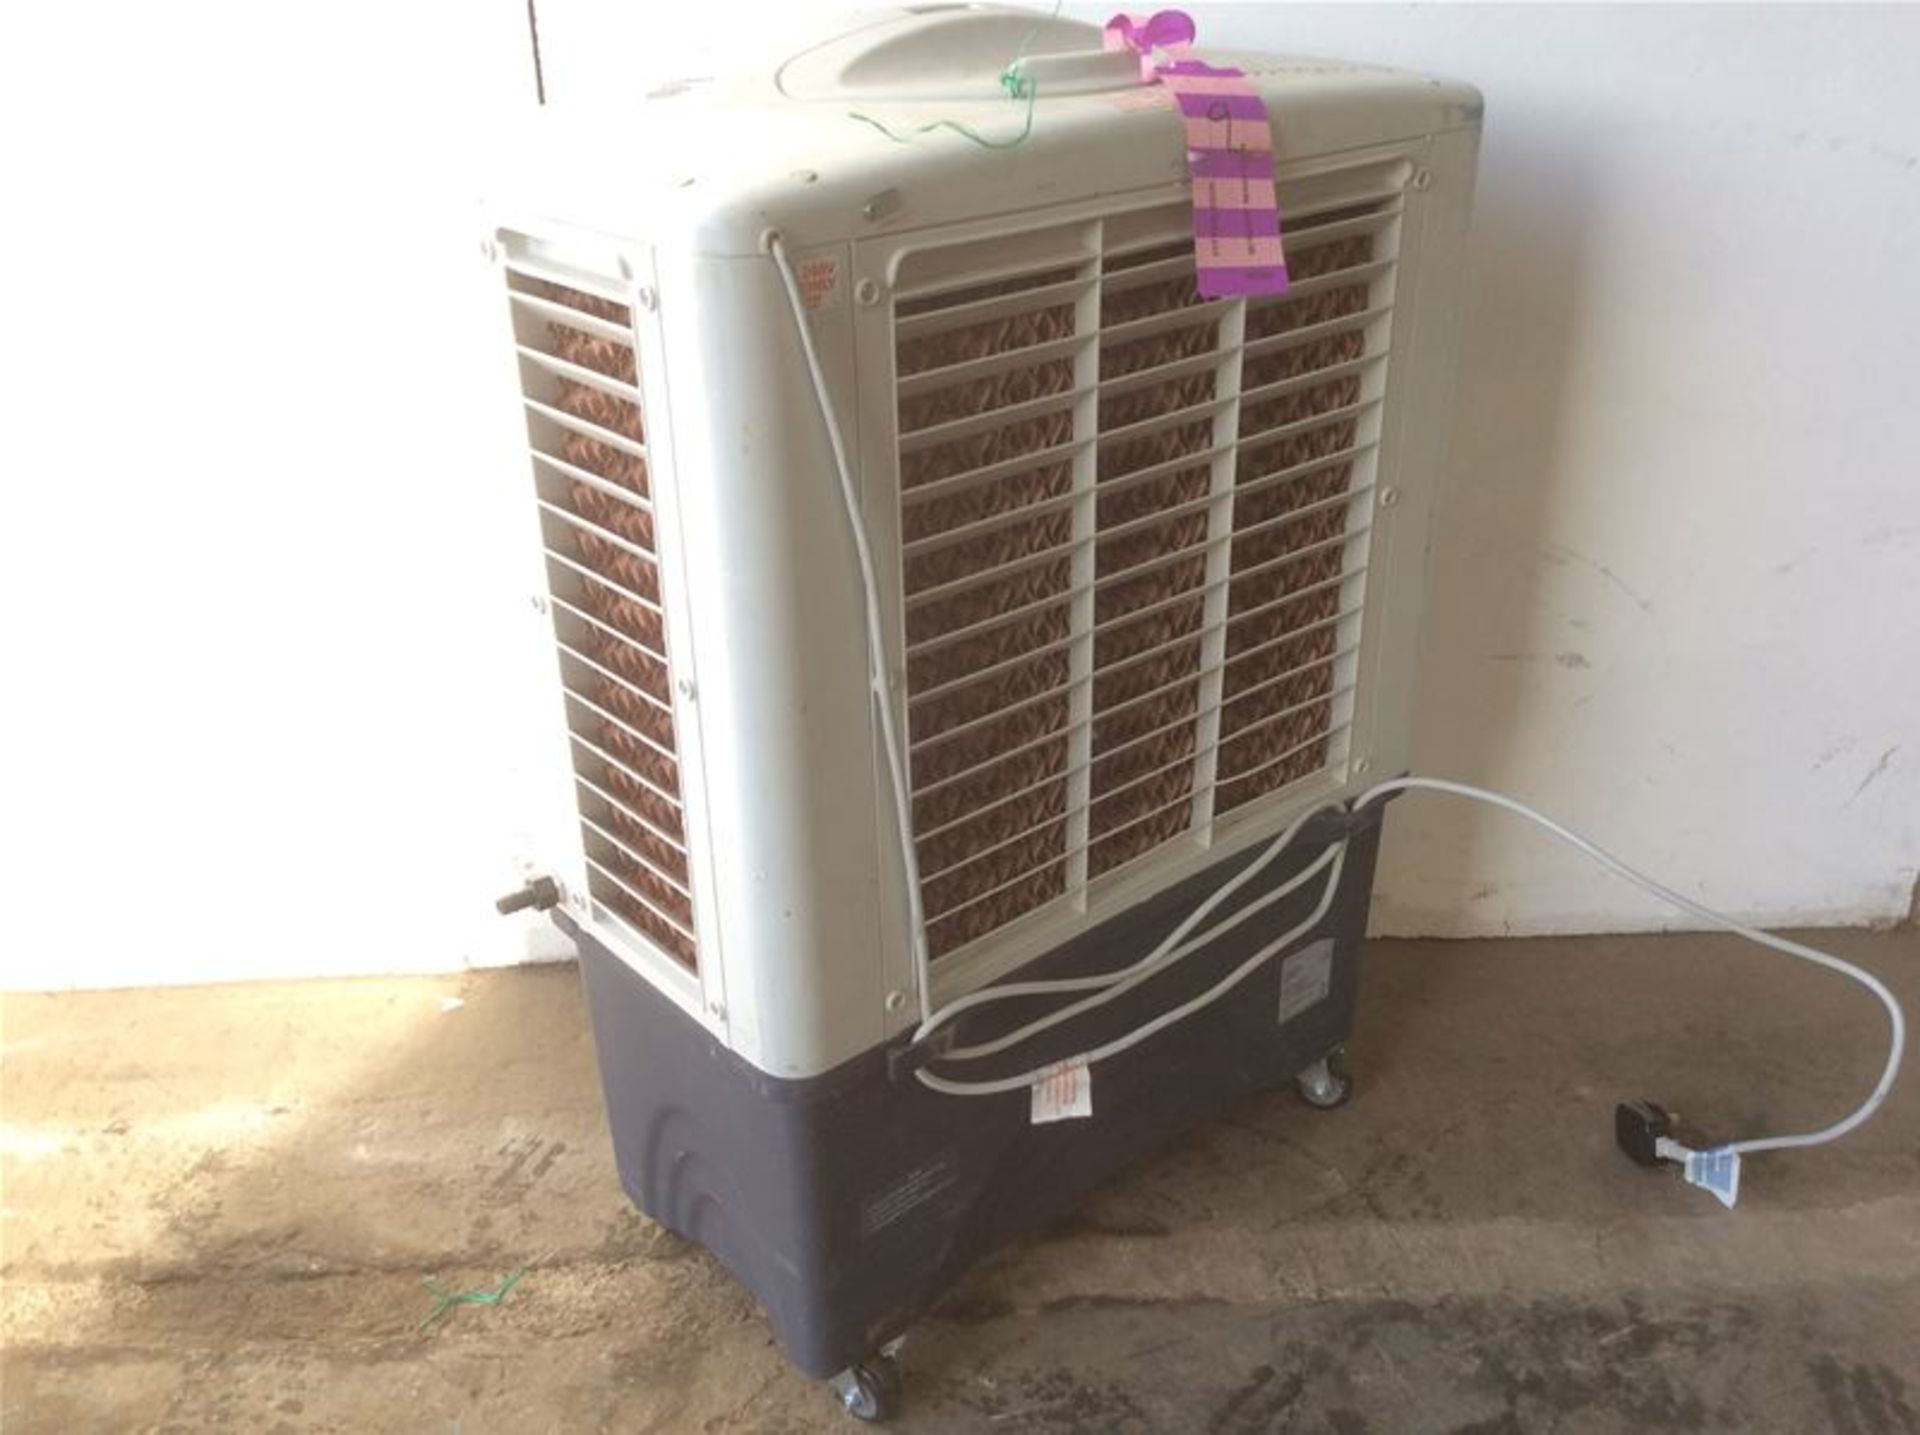 HONEYWELL CL48PM EVAPROTIVE AIR COOLER - 240V - Image 2 of 2